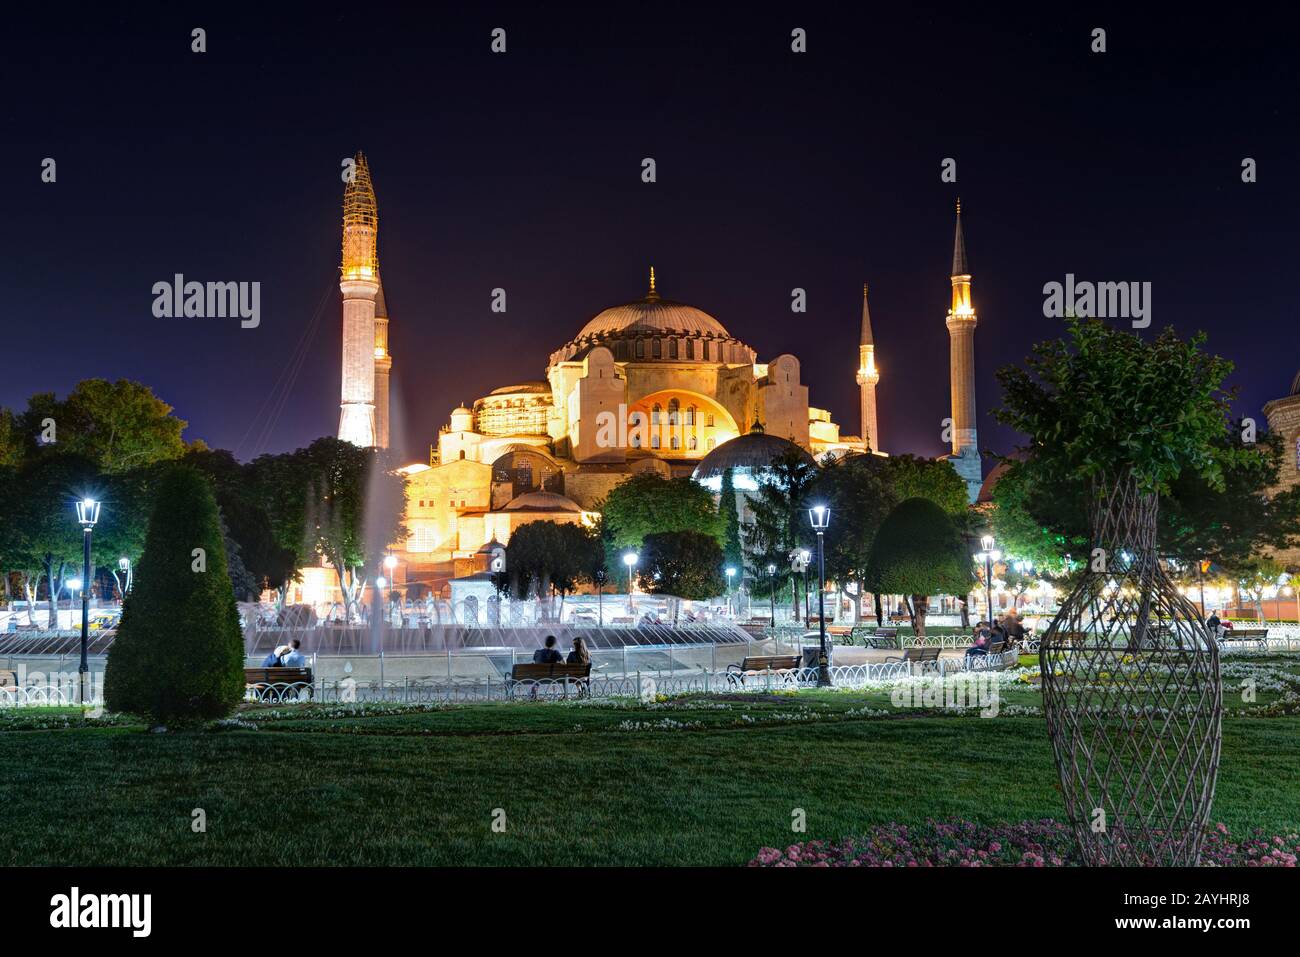 View of the Hagia Sophia at night in Istanbul, Turkey. Hagia Sophia is the greatest monument of Byzantine Culture. Stock Photo